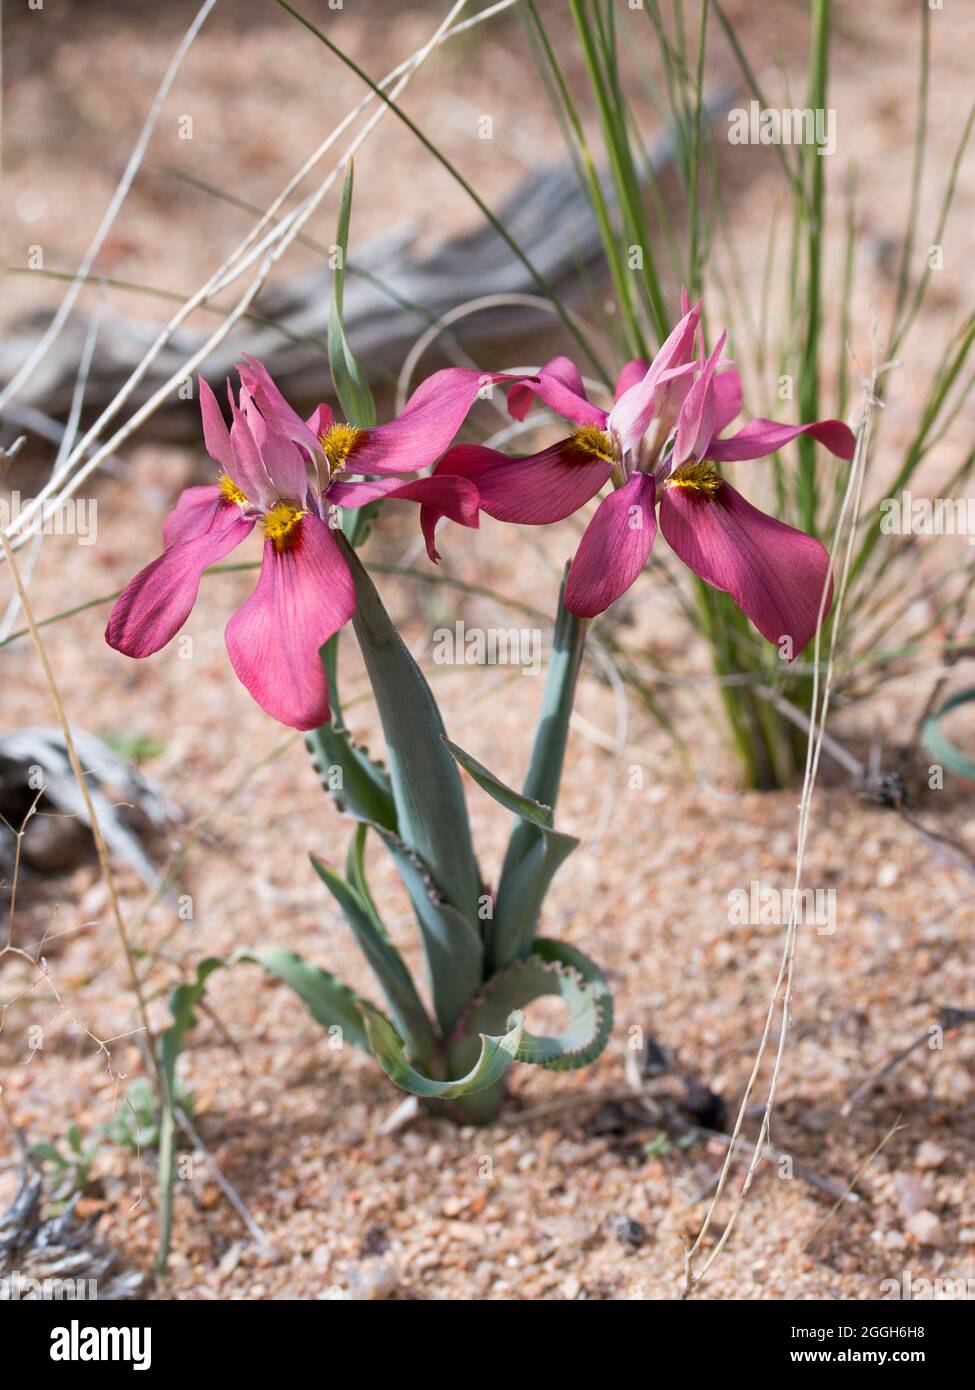 A flower from the Iris family (Moraea ciliata ssp. cuprina) beautiful bulb plant with a light maroon brown flower Stock Photo